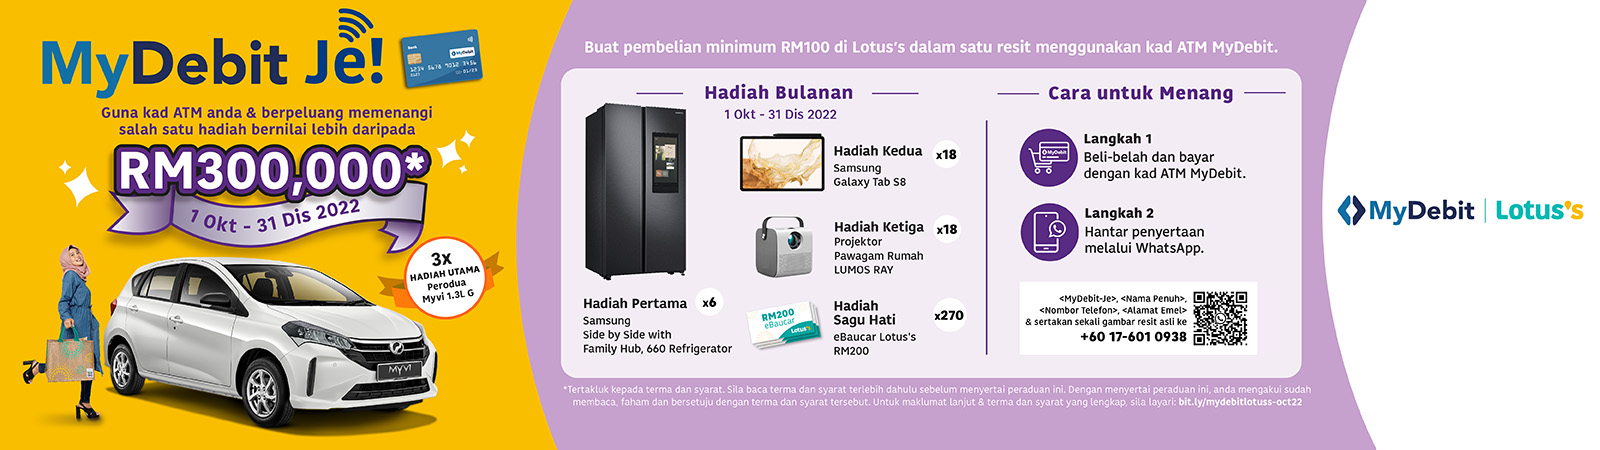 MyDebit Je with Your ATM Card at Tunas Manja Group